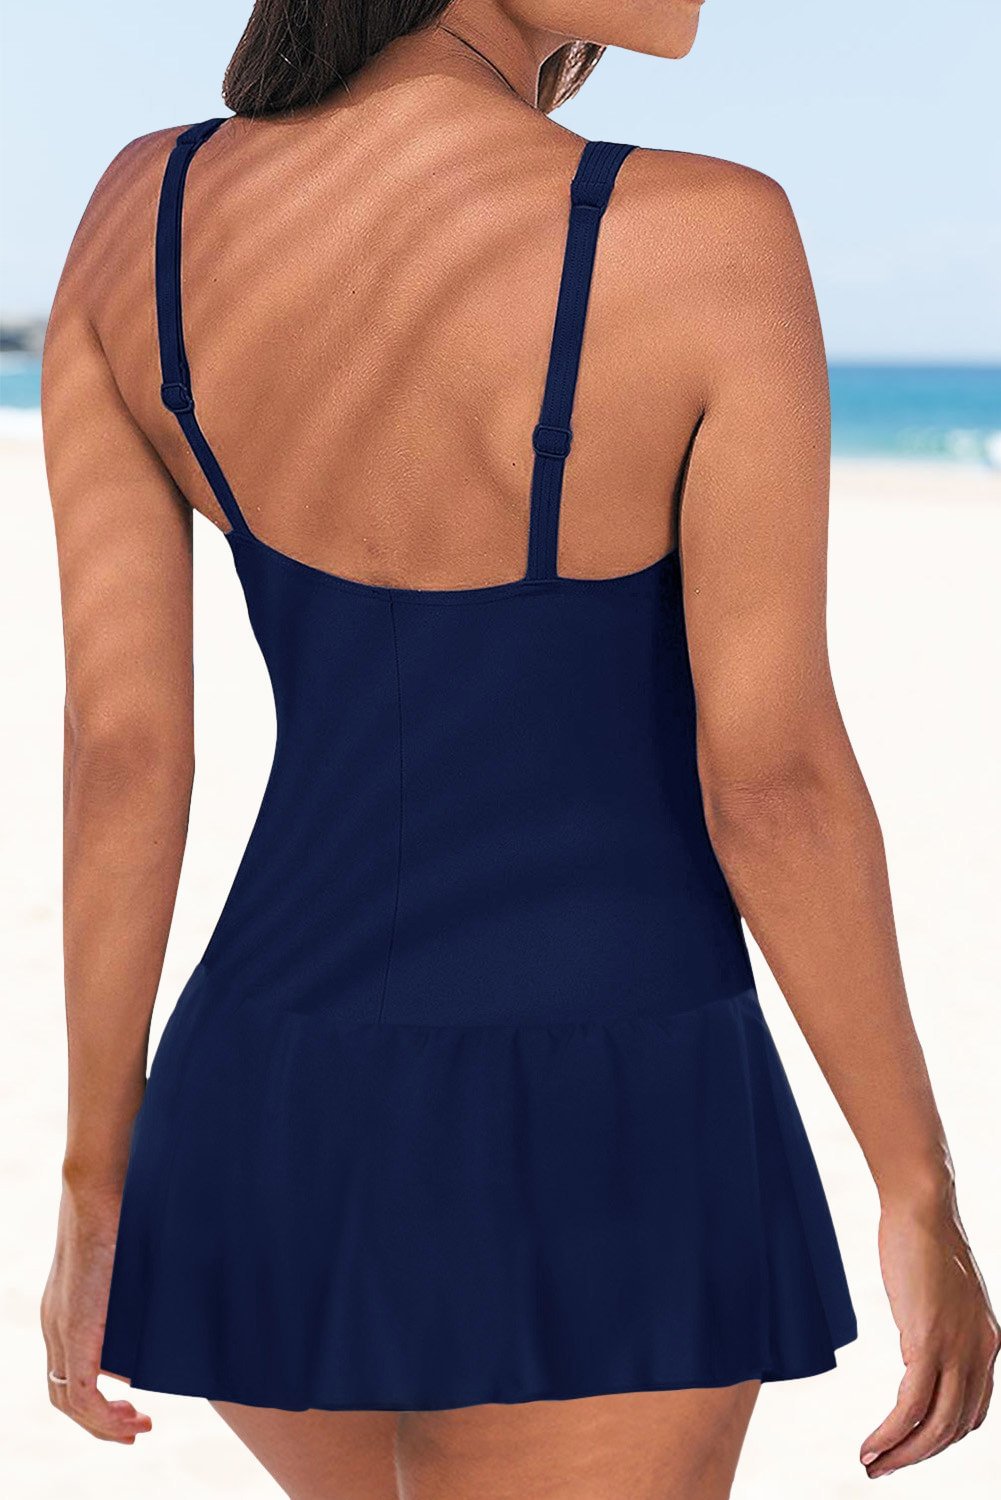 Womens Solid Ruched Swimdress Push Up Padded Lace Up One Piece